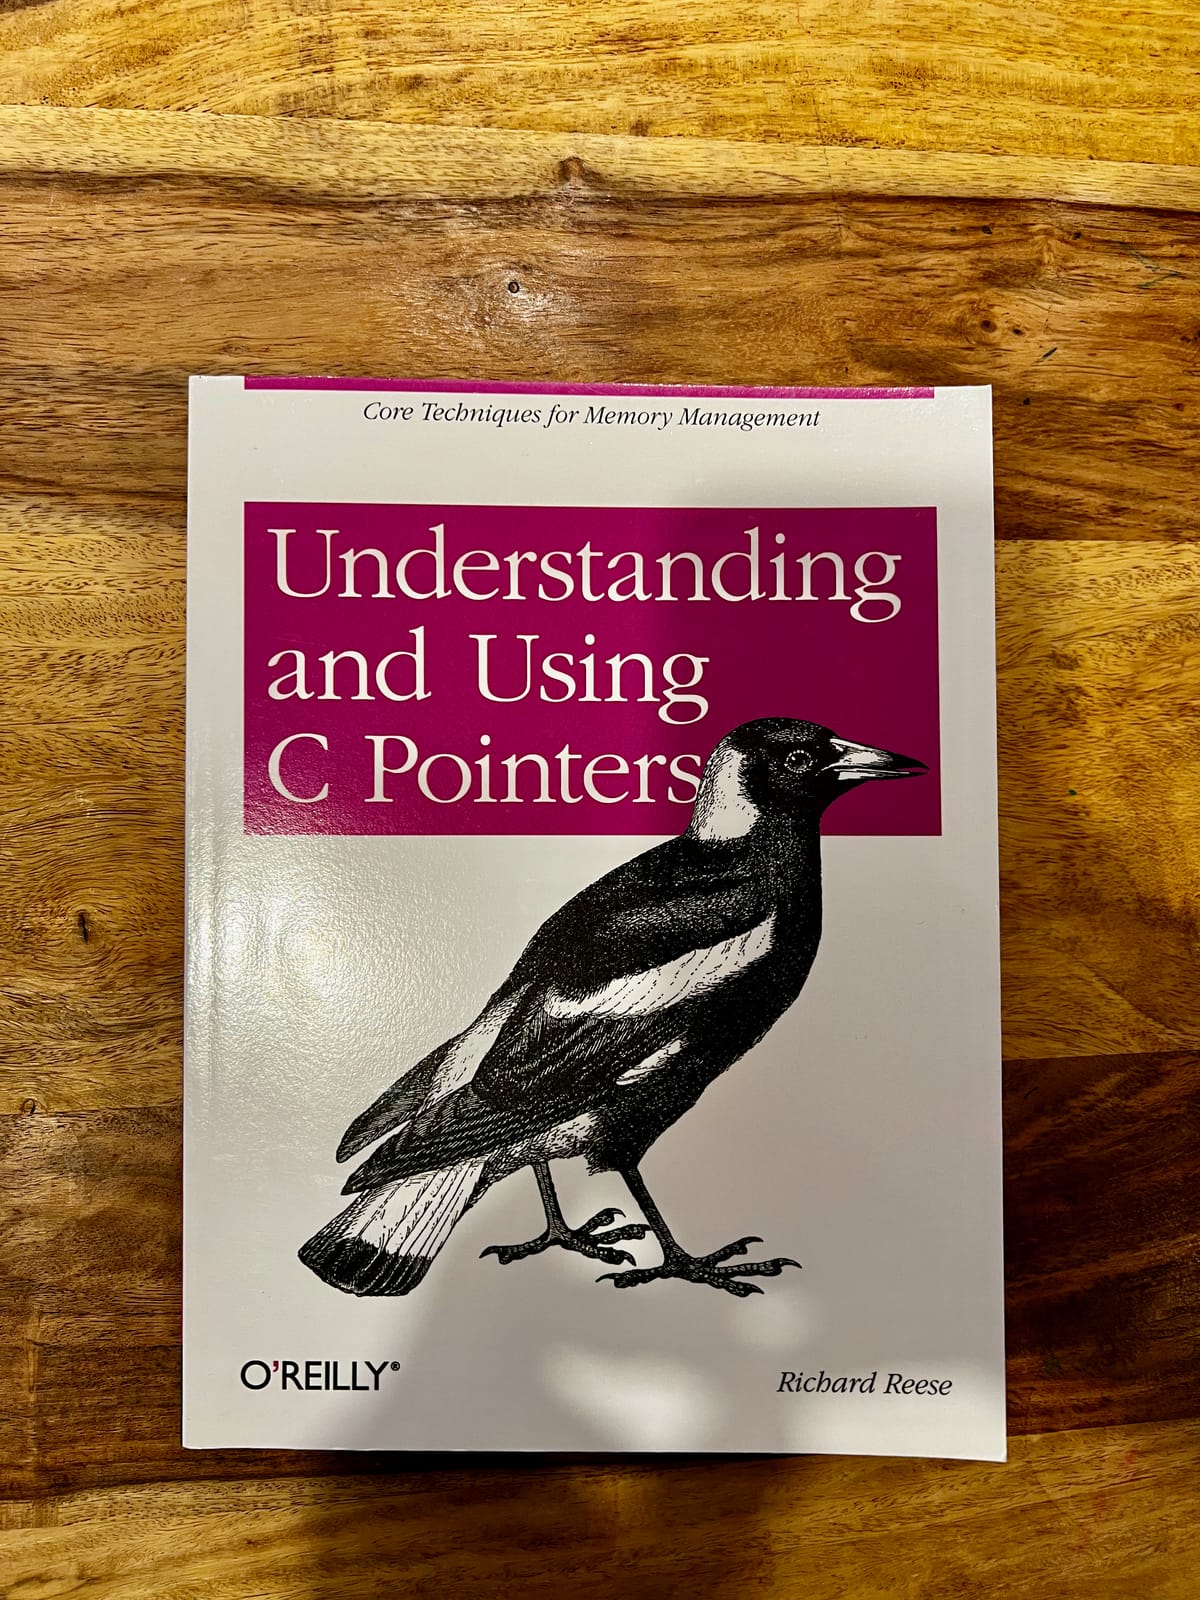 "Understanding and Using C Pointers" by Richard Reese